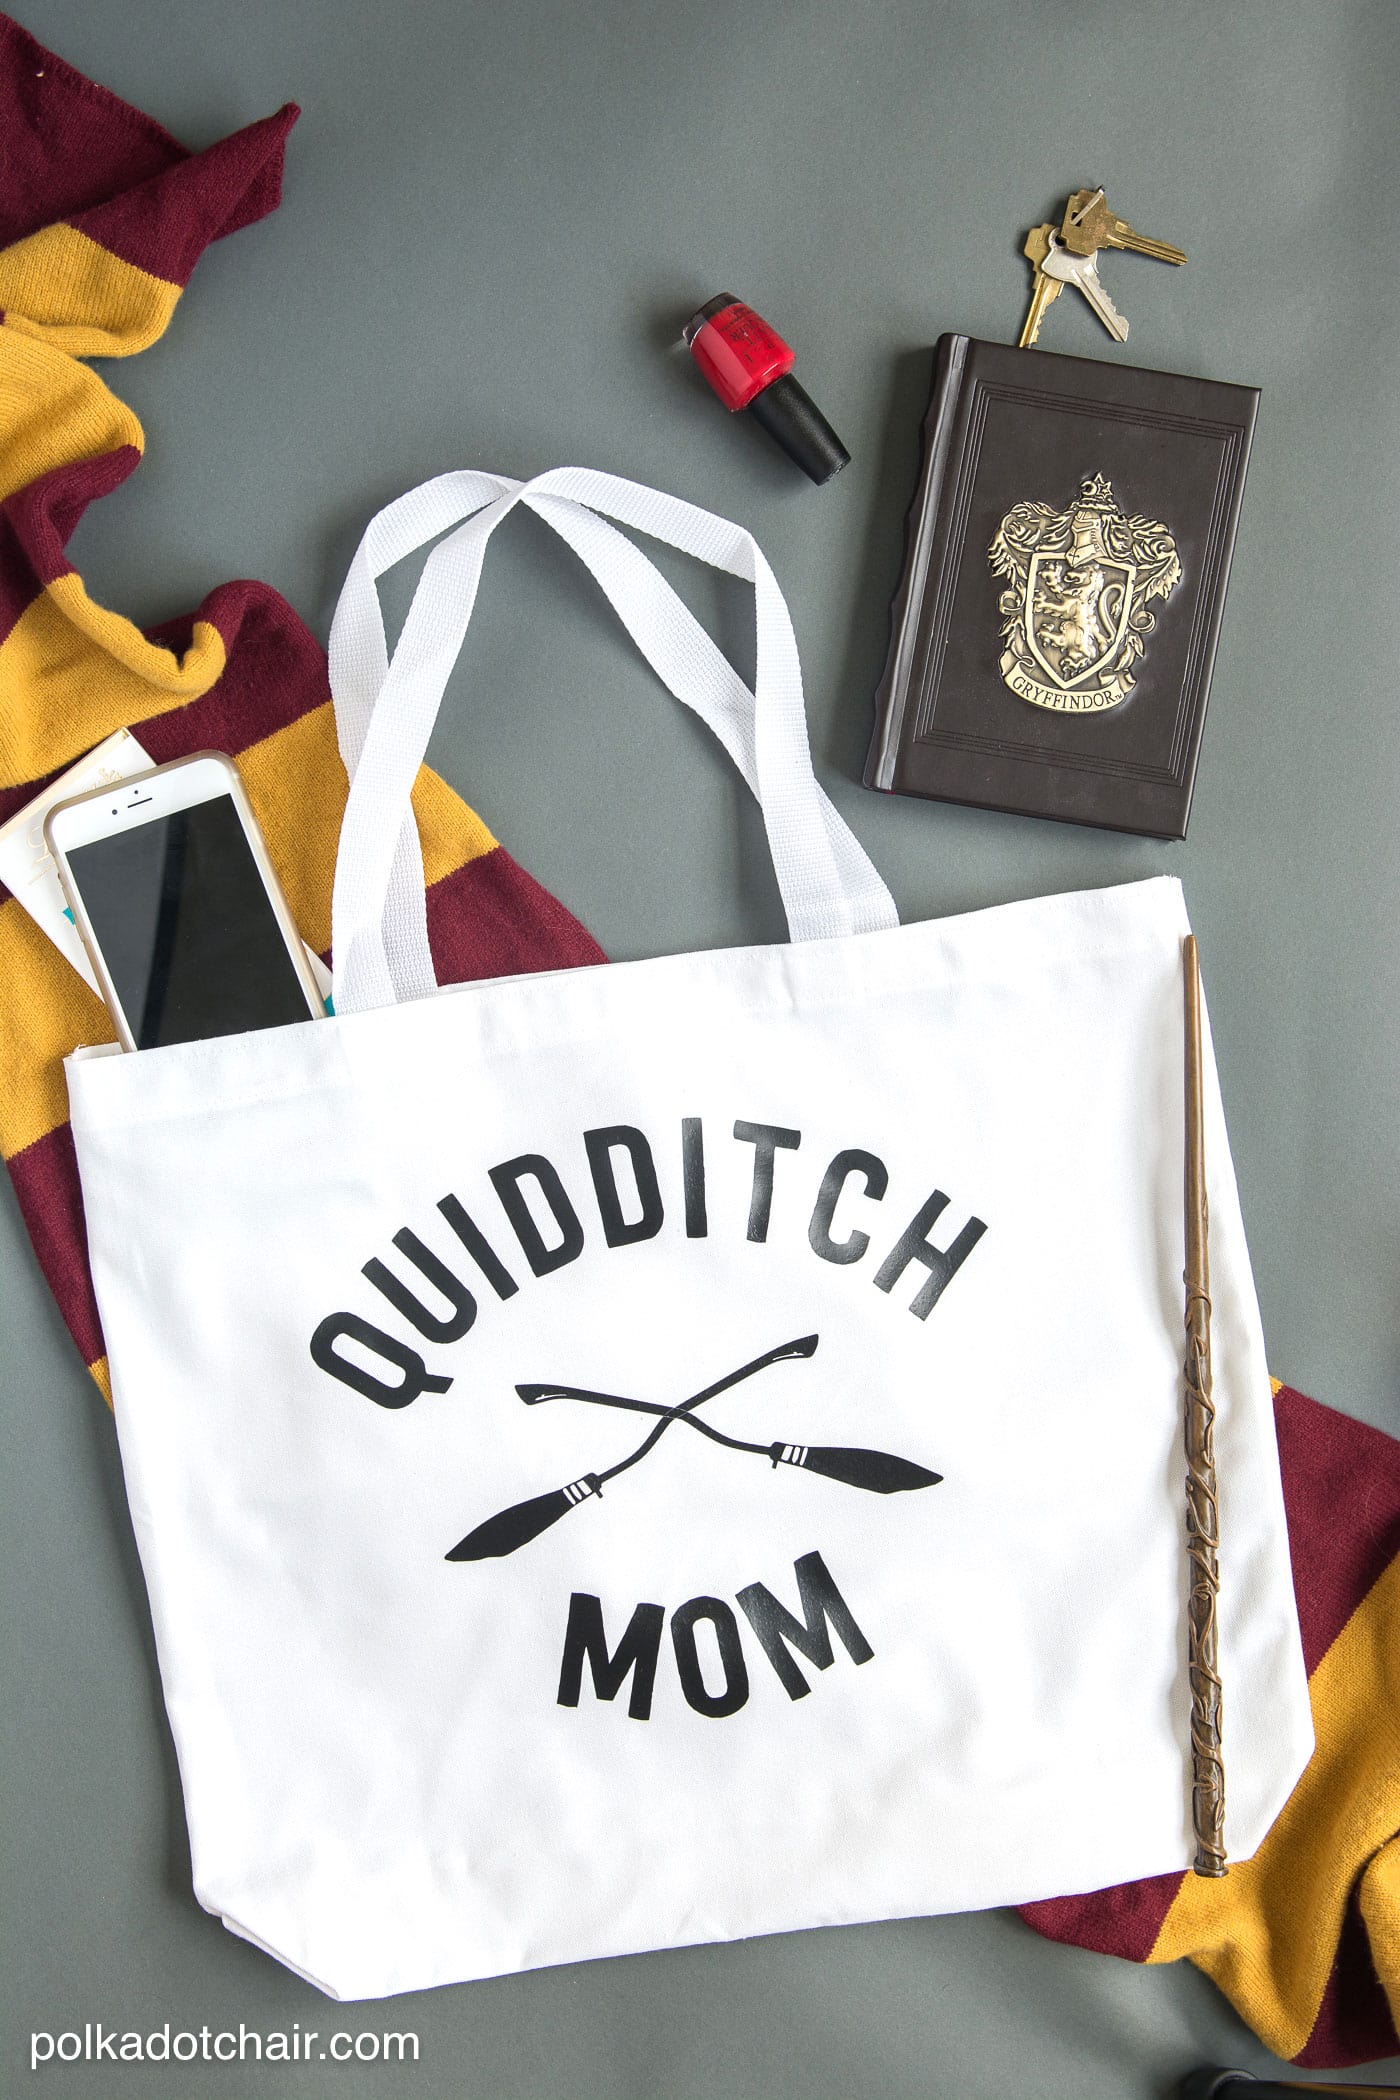 quidditch-mom-tote-and-other-harry-potter-crafts